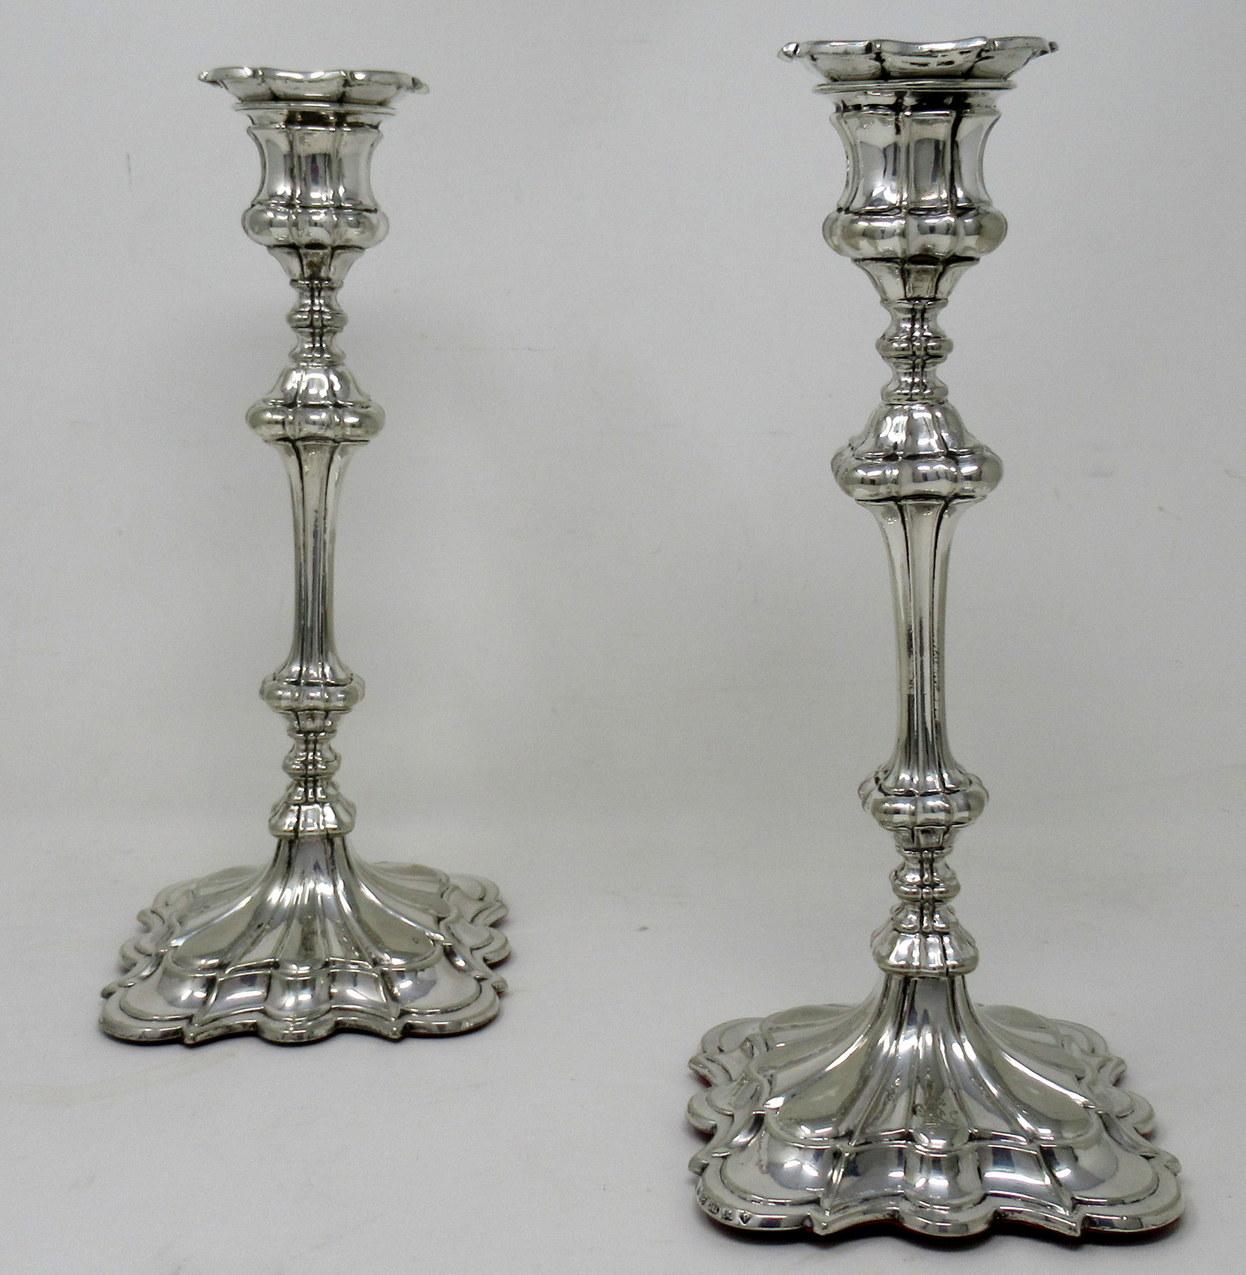 Beautiful and stylish high-quality pair of antique Elkington and Co silver heavy gauge plated candlesticks made in the George III style with square ribbed tapering columns, annulated knops and raised stepped square petaled and weighted bases.